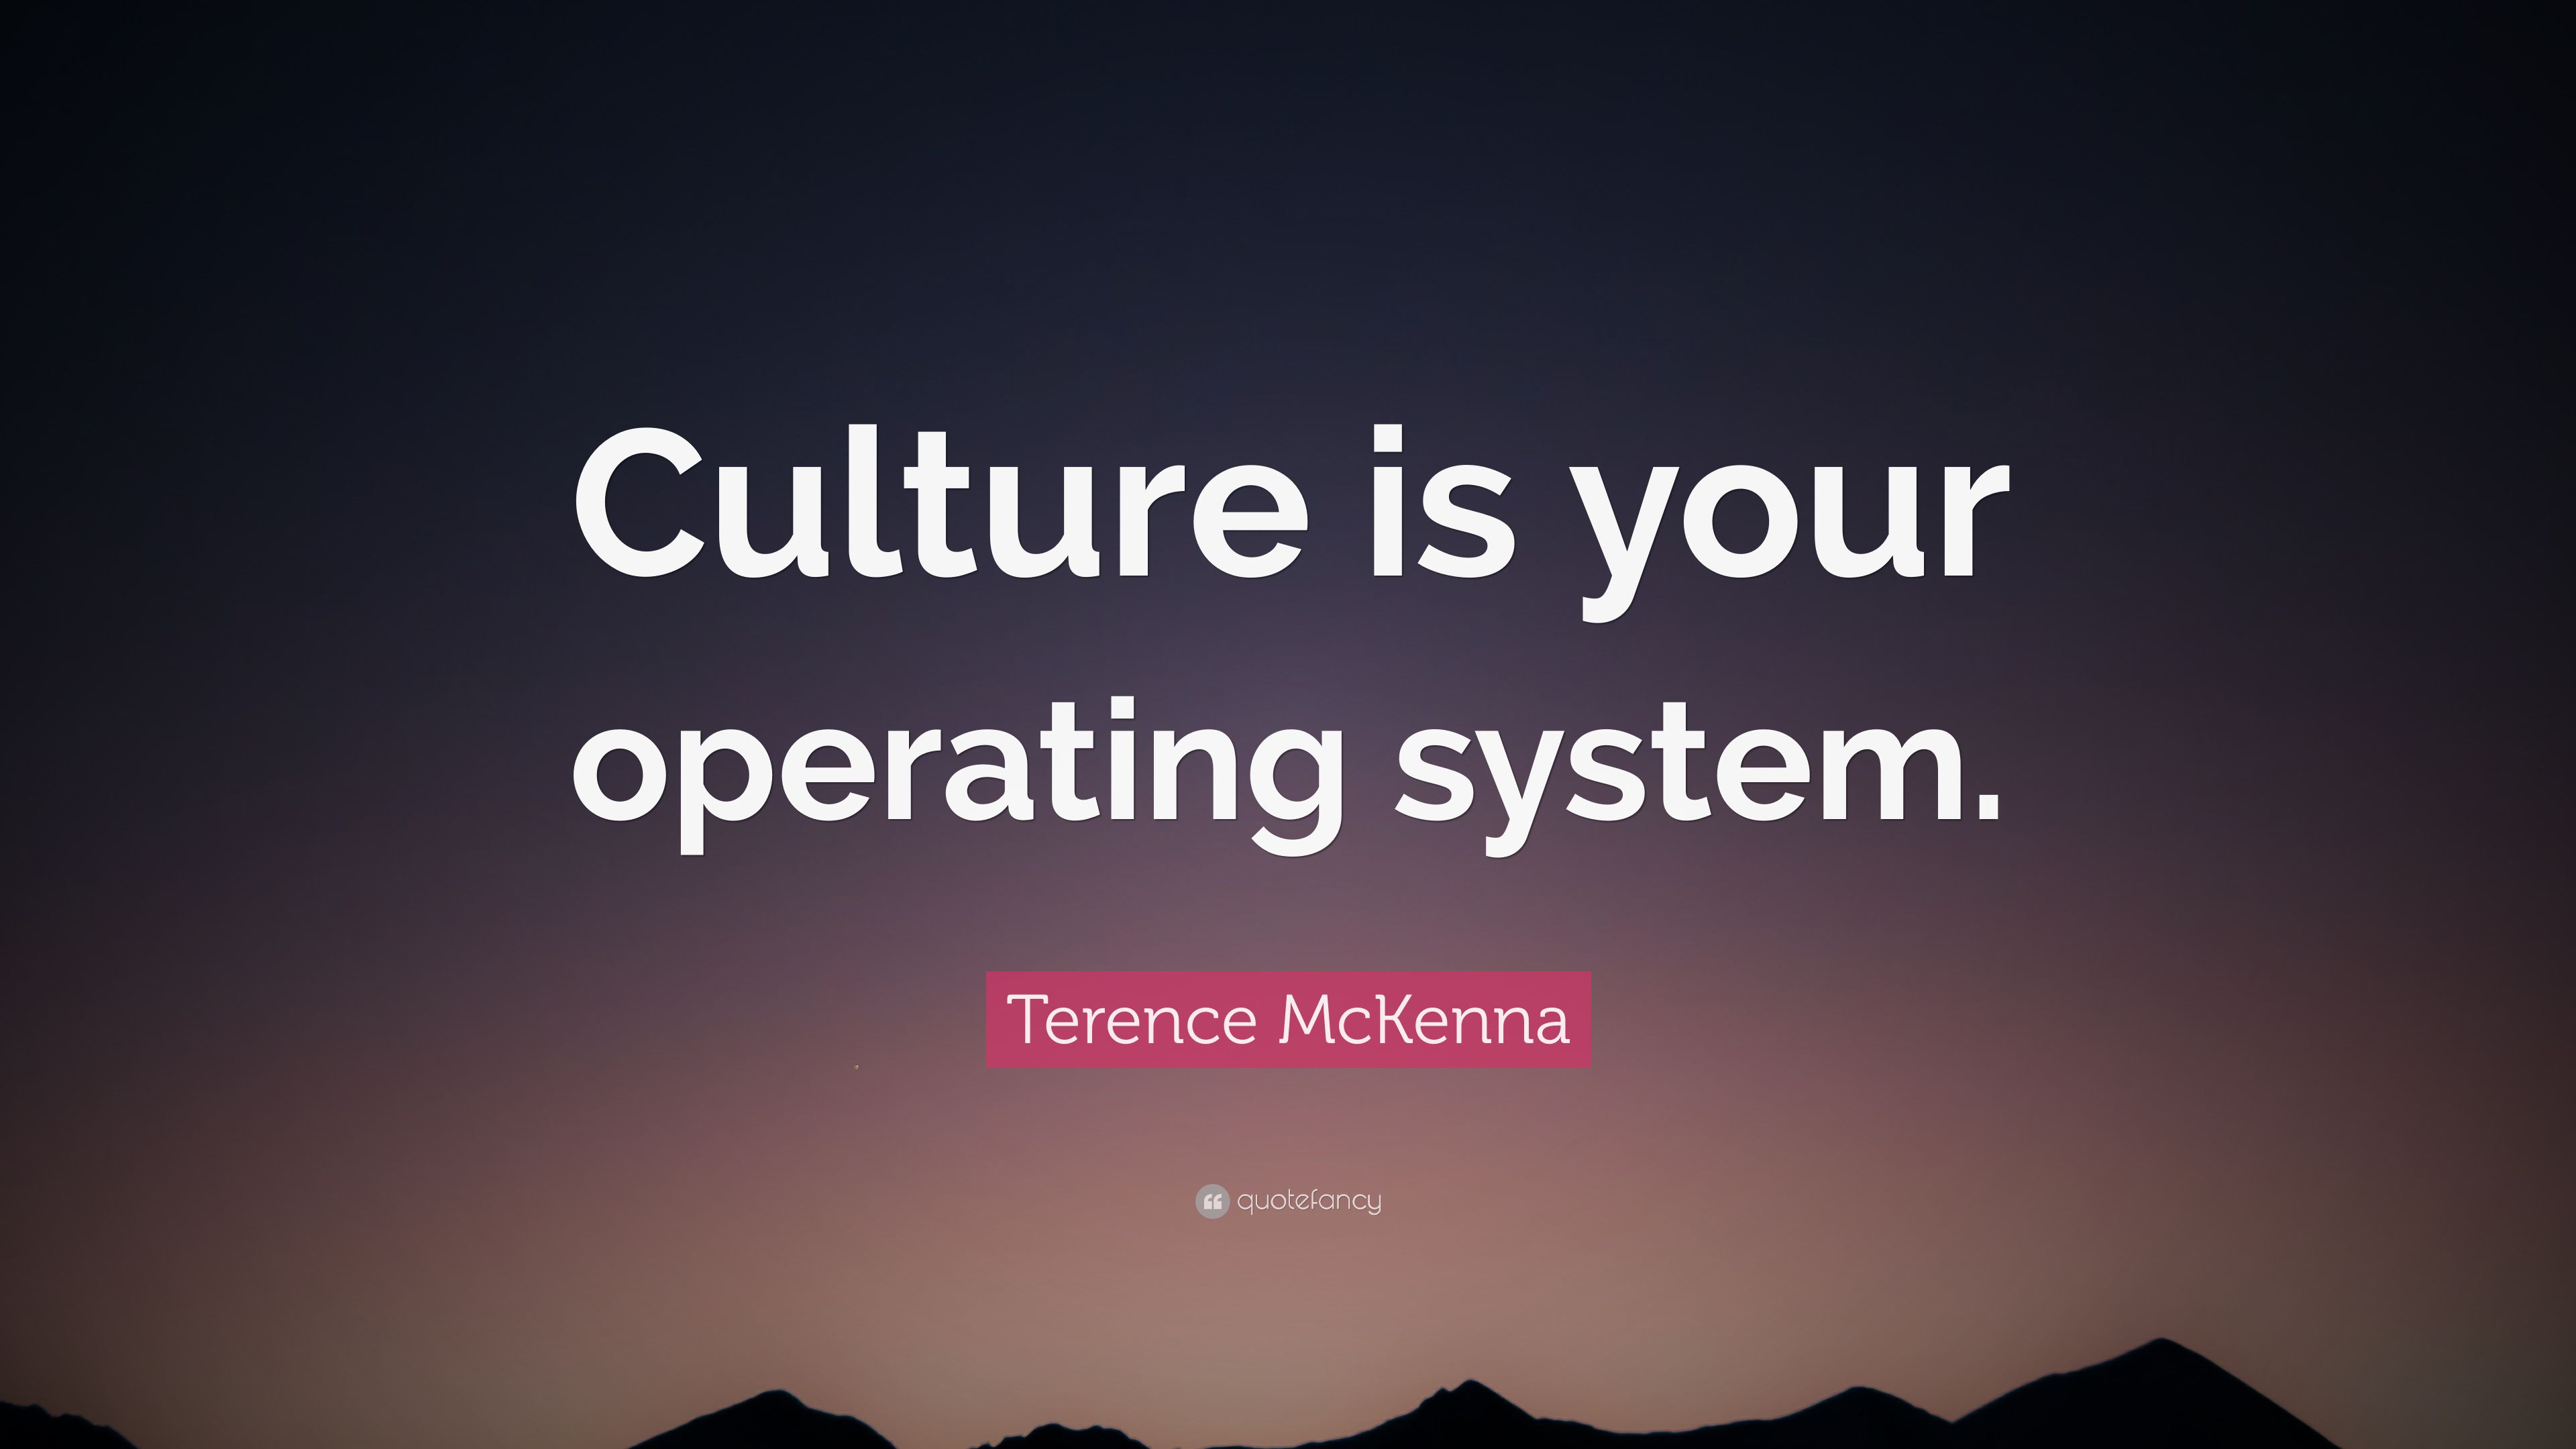 Terence McKenna Quote: “Culture is your operating system.” (7 wallpaper)